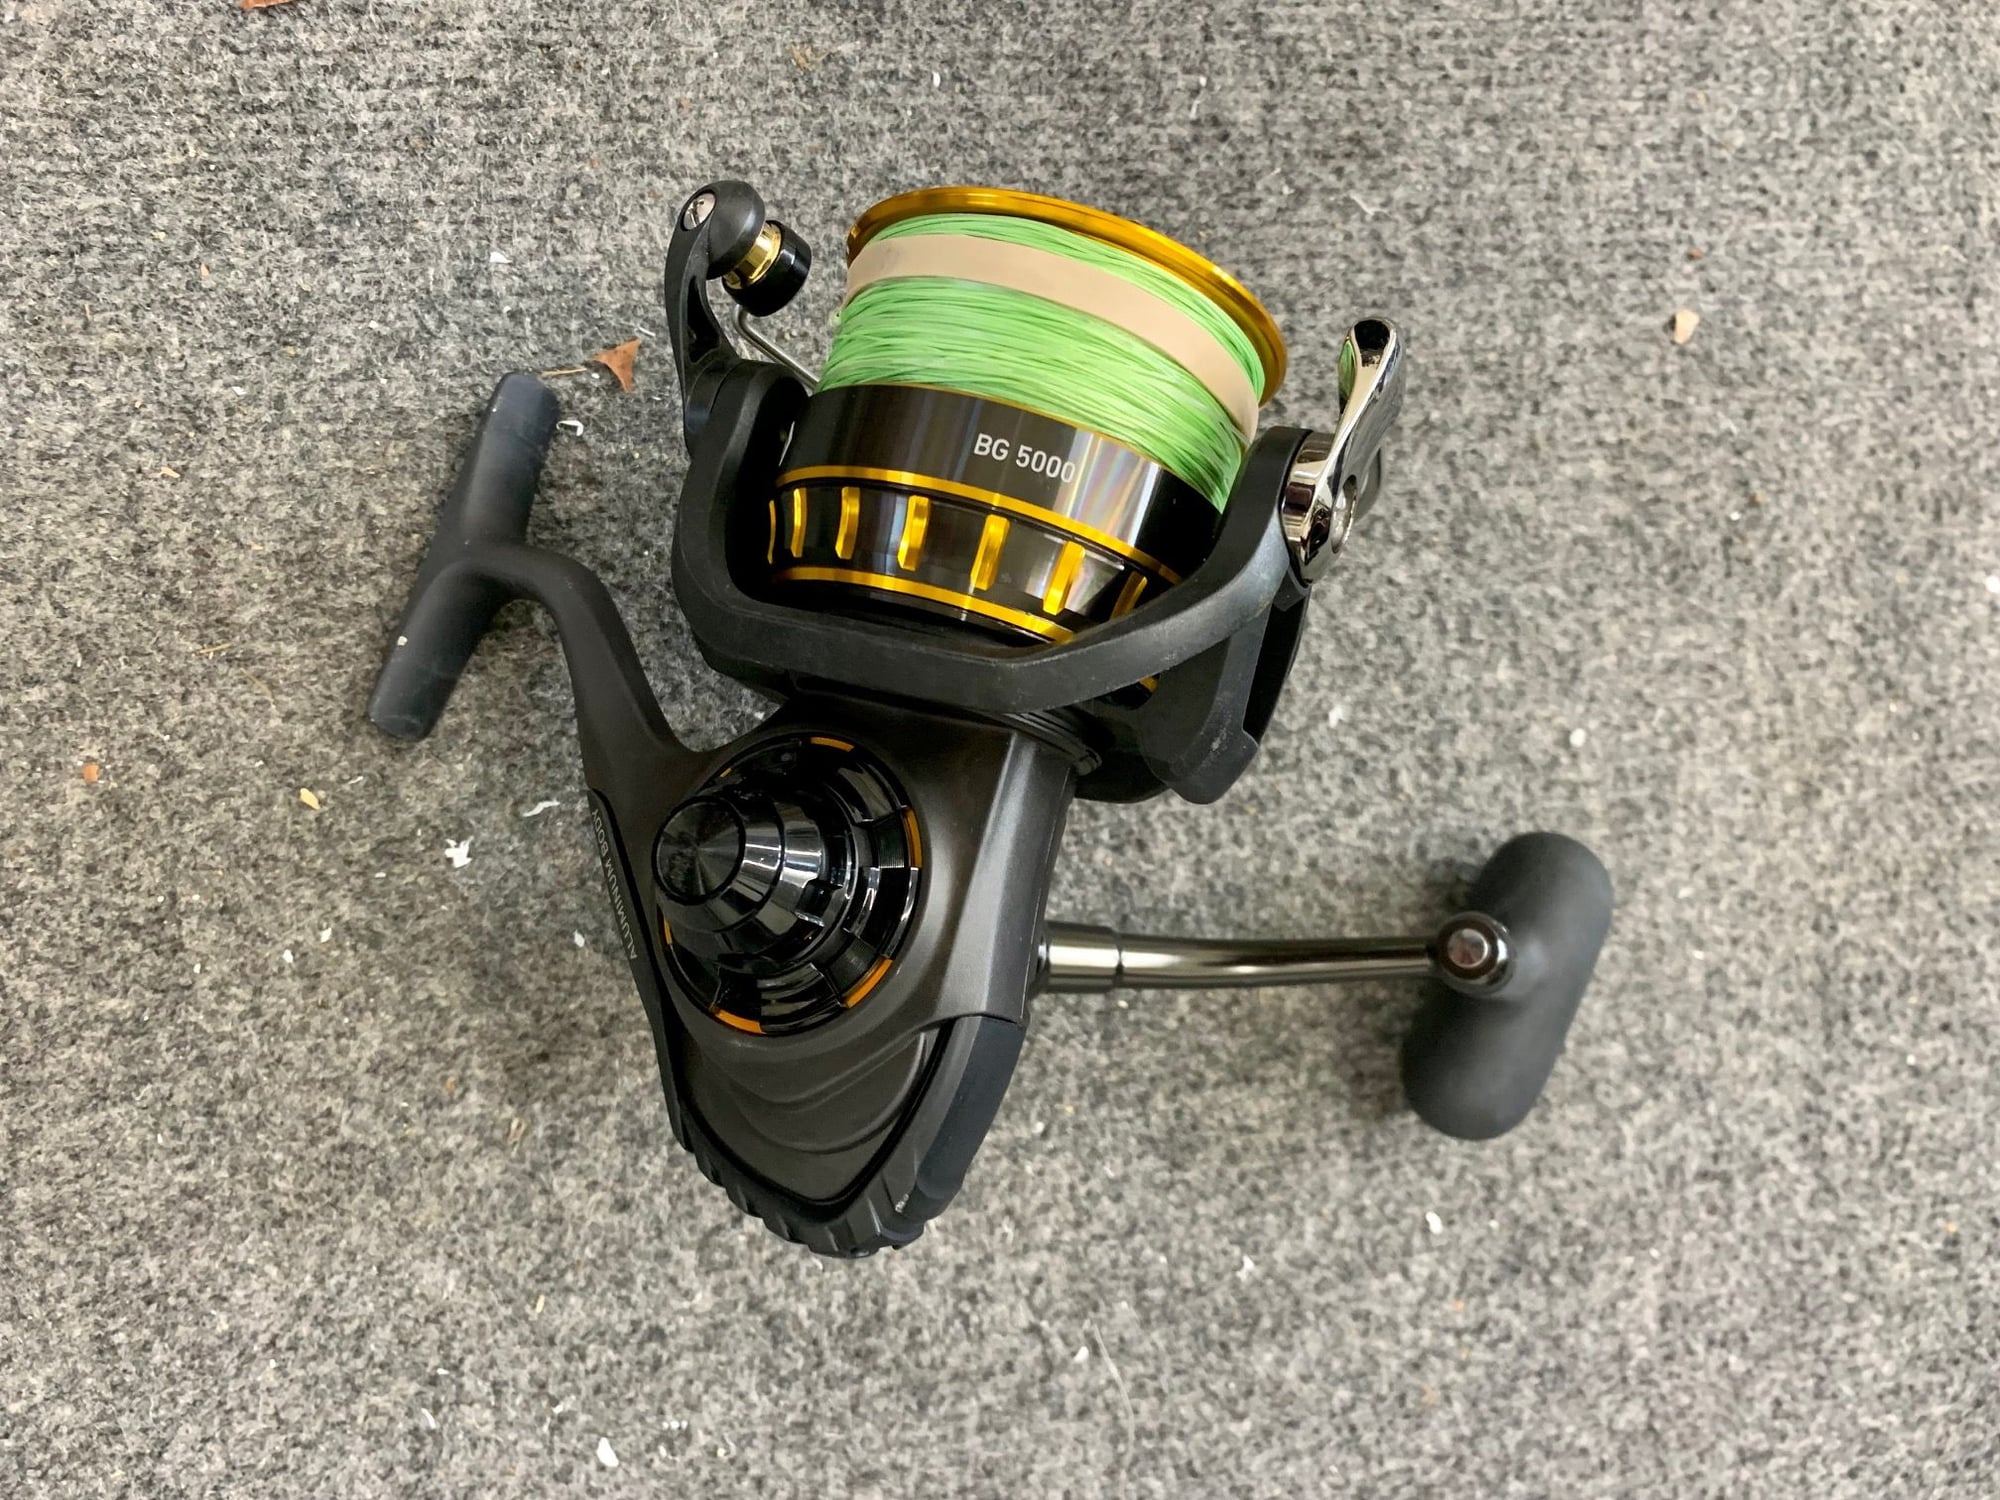 Good pier casting reel for casting heavy weights? - The Hull Truth -  Boating and Fishing Forum